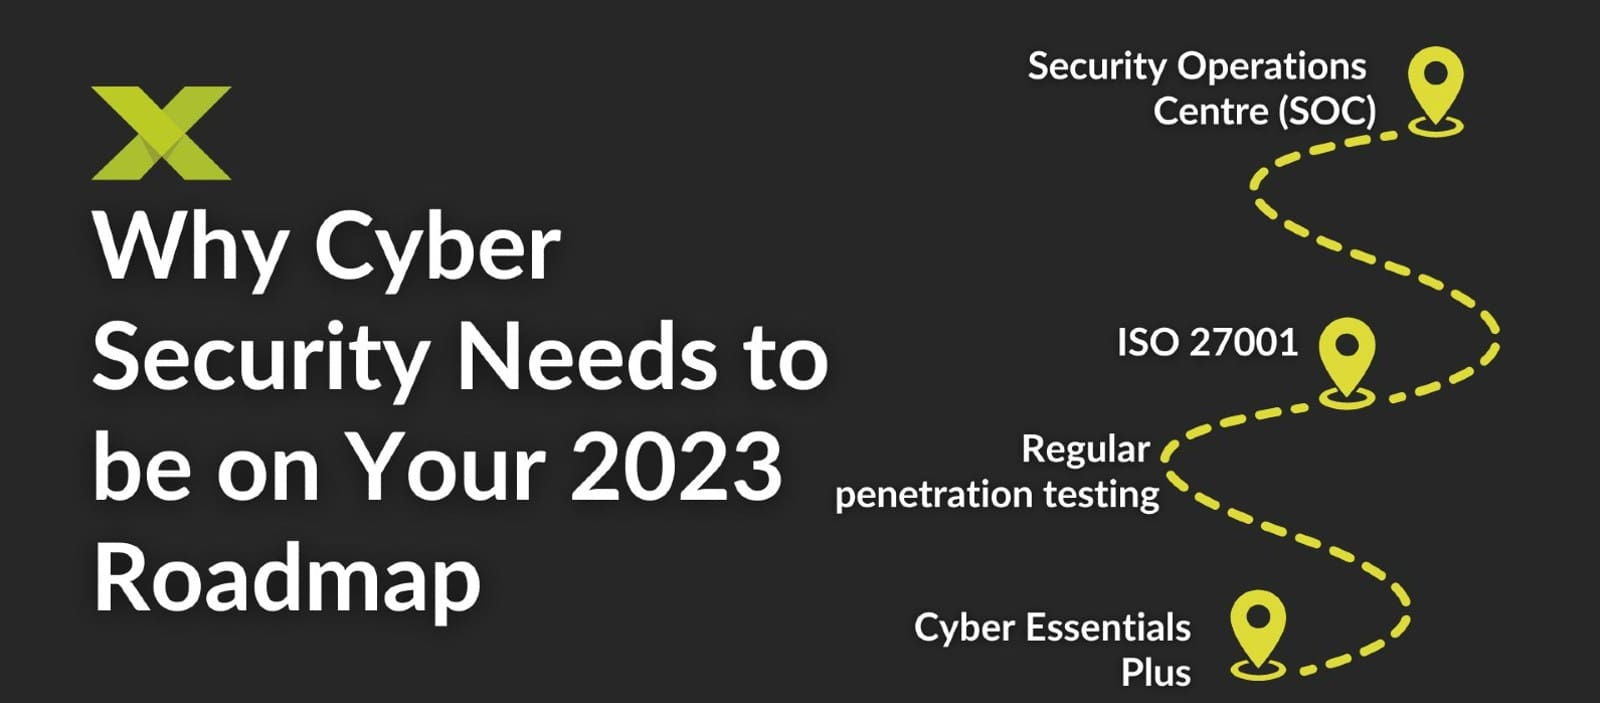 Why cyber security needs to be on your 2023